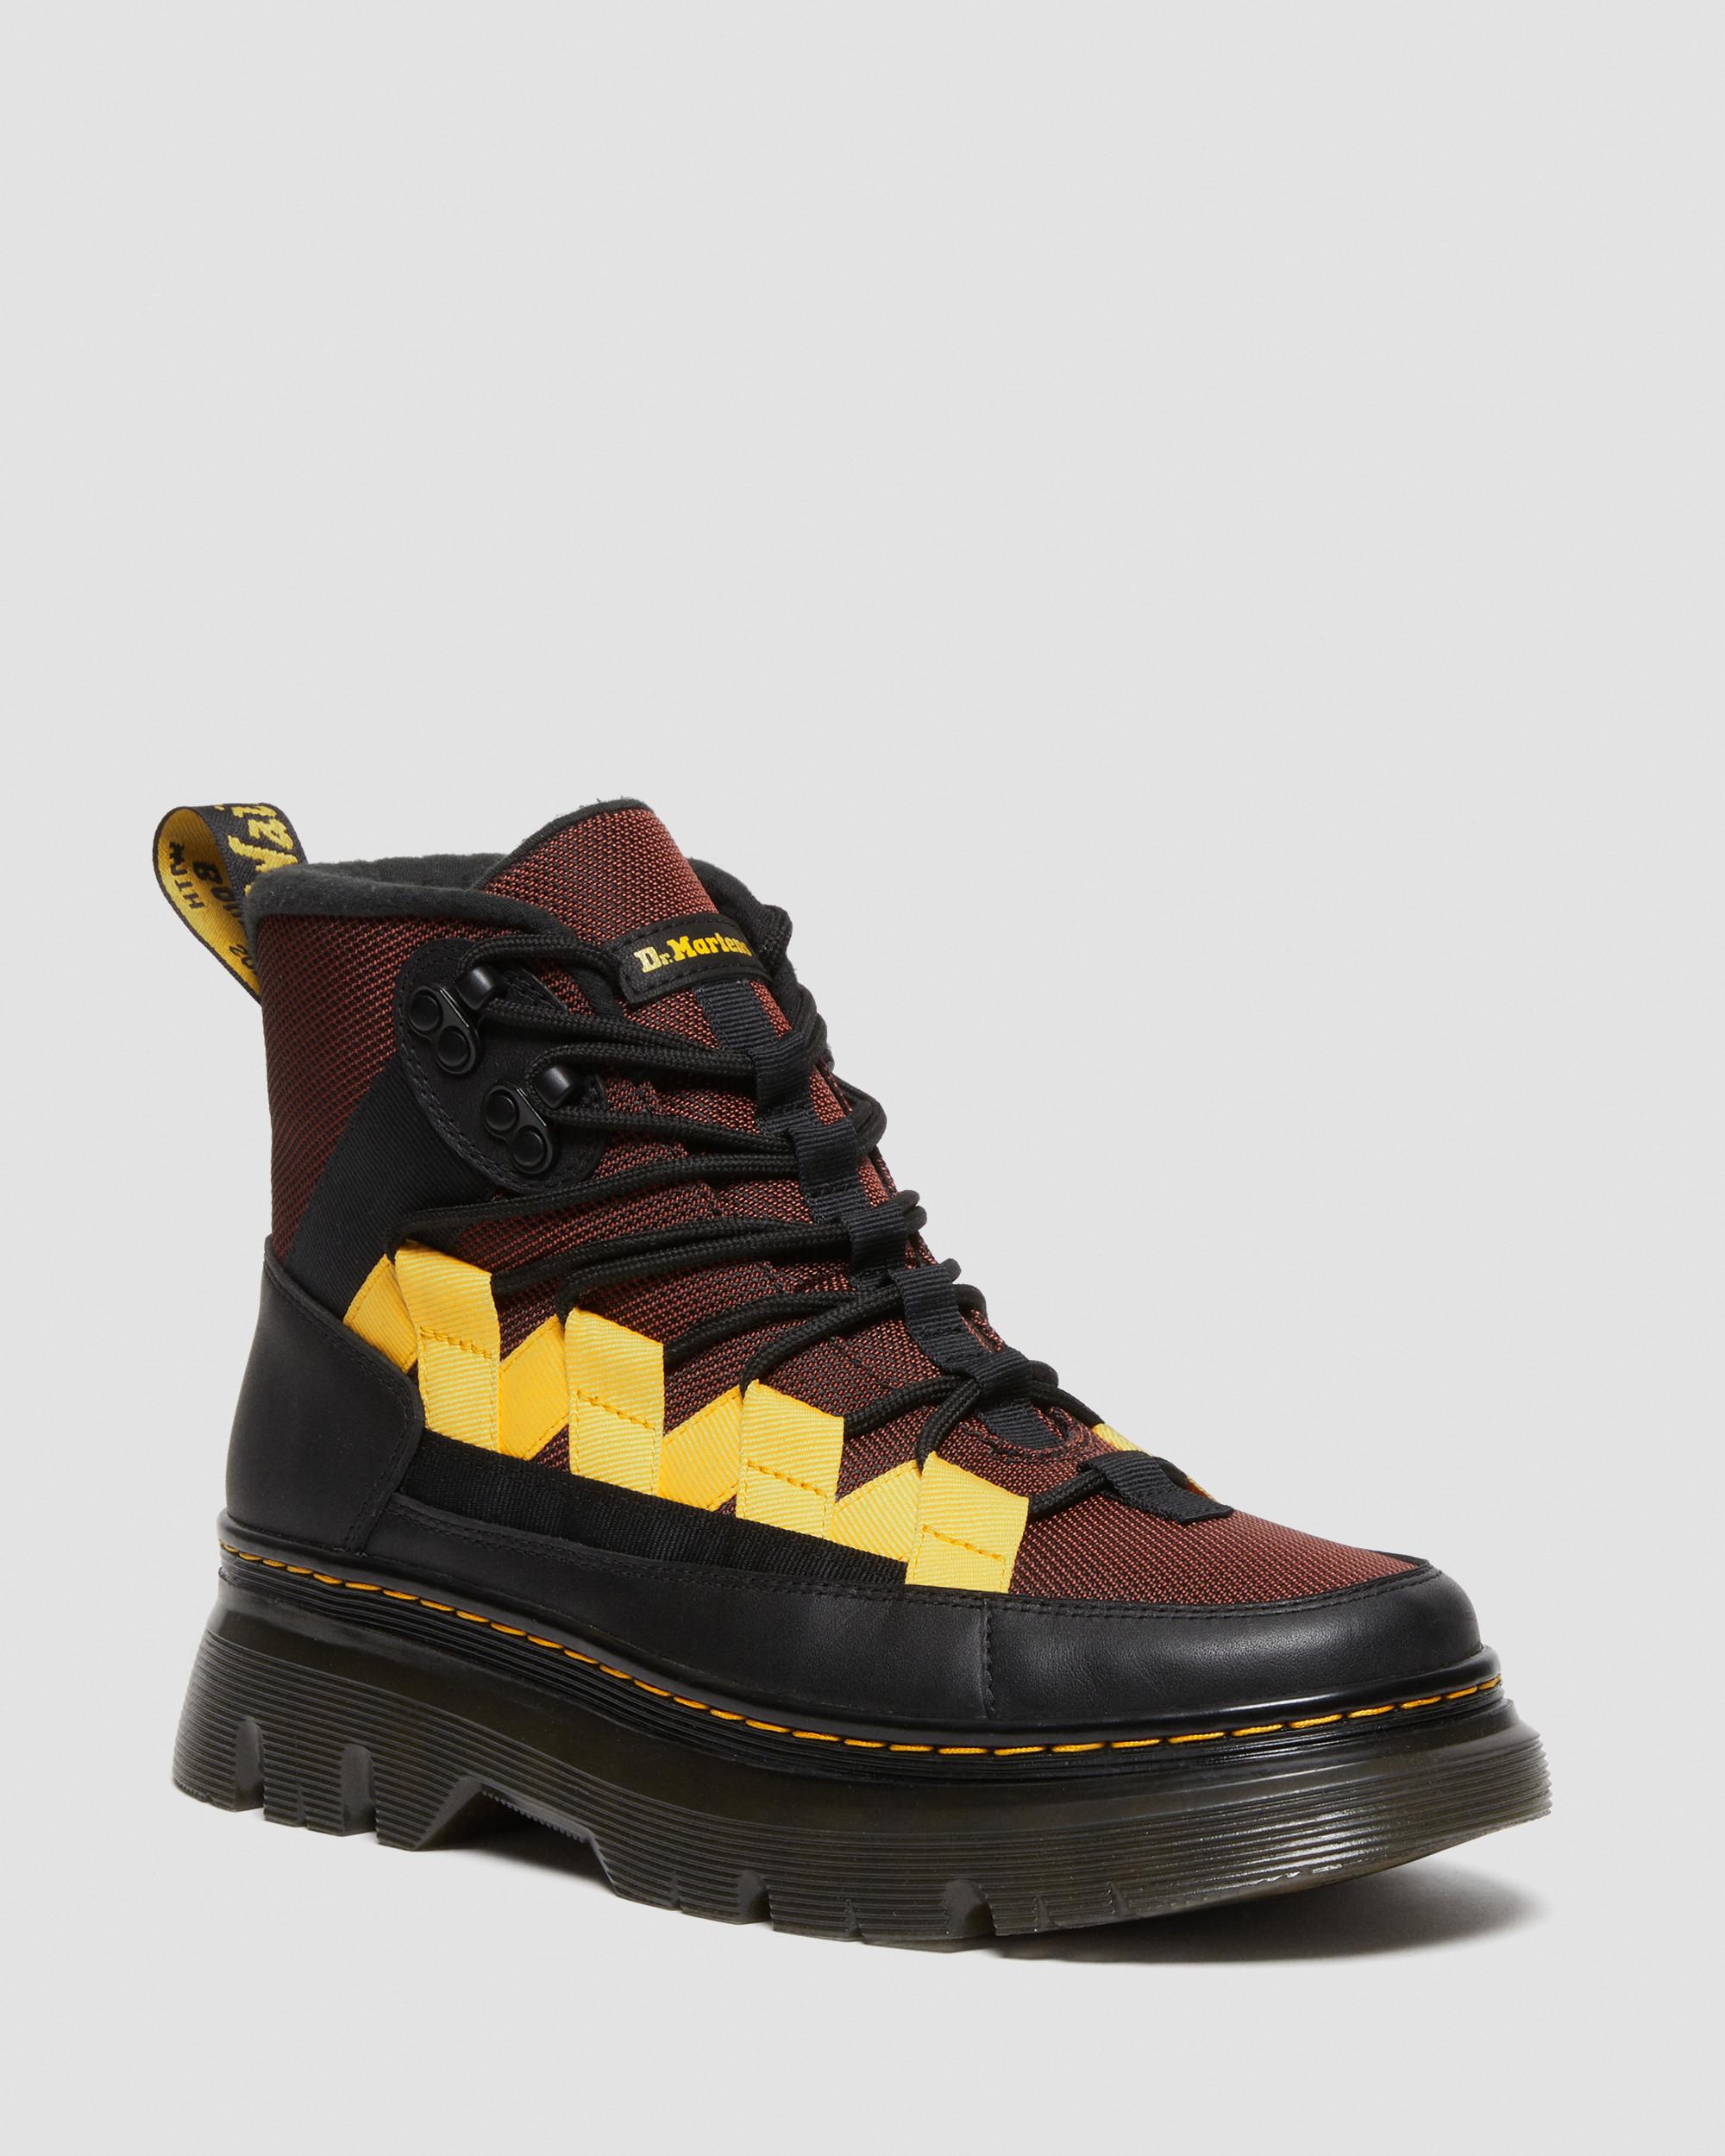 Boury Warmwair Contrast Casual Boots in Black | Dr. Martens